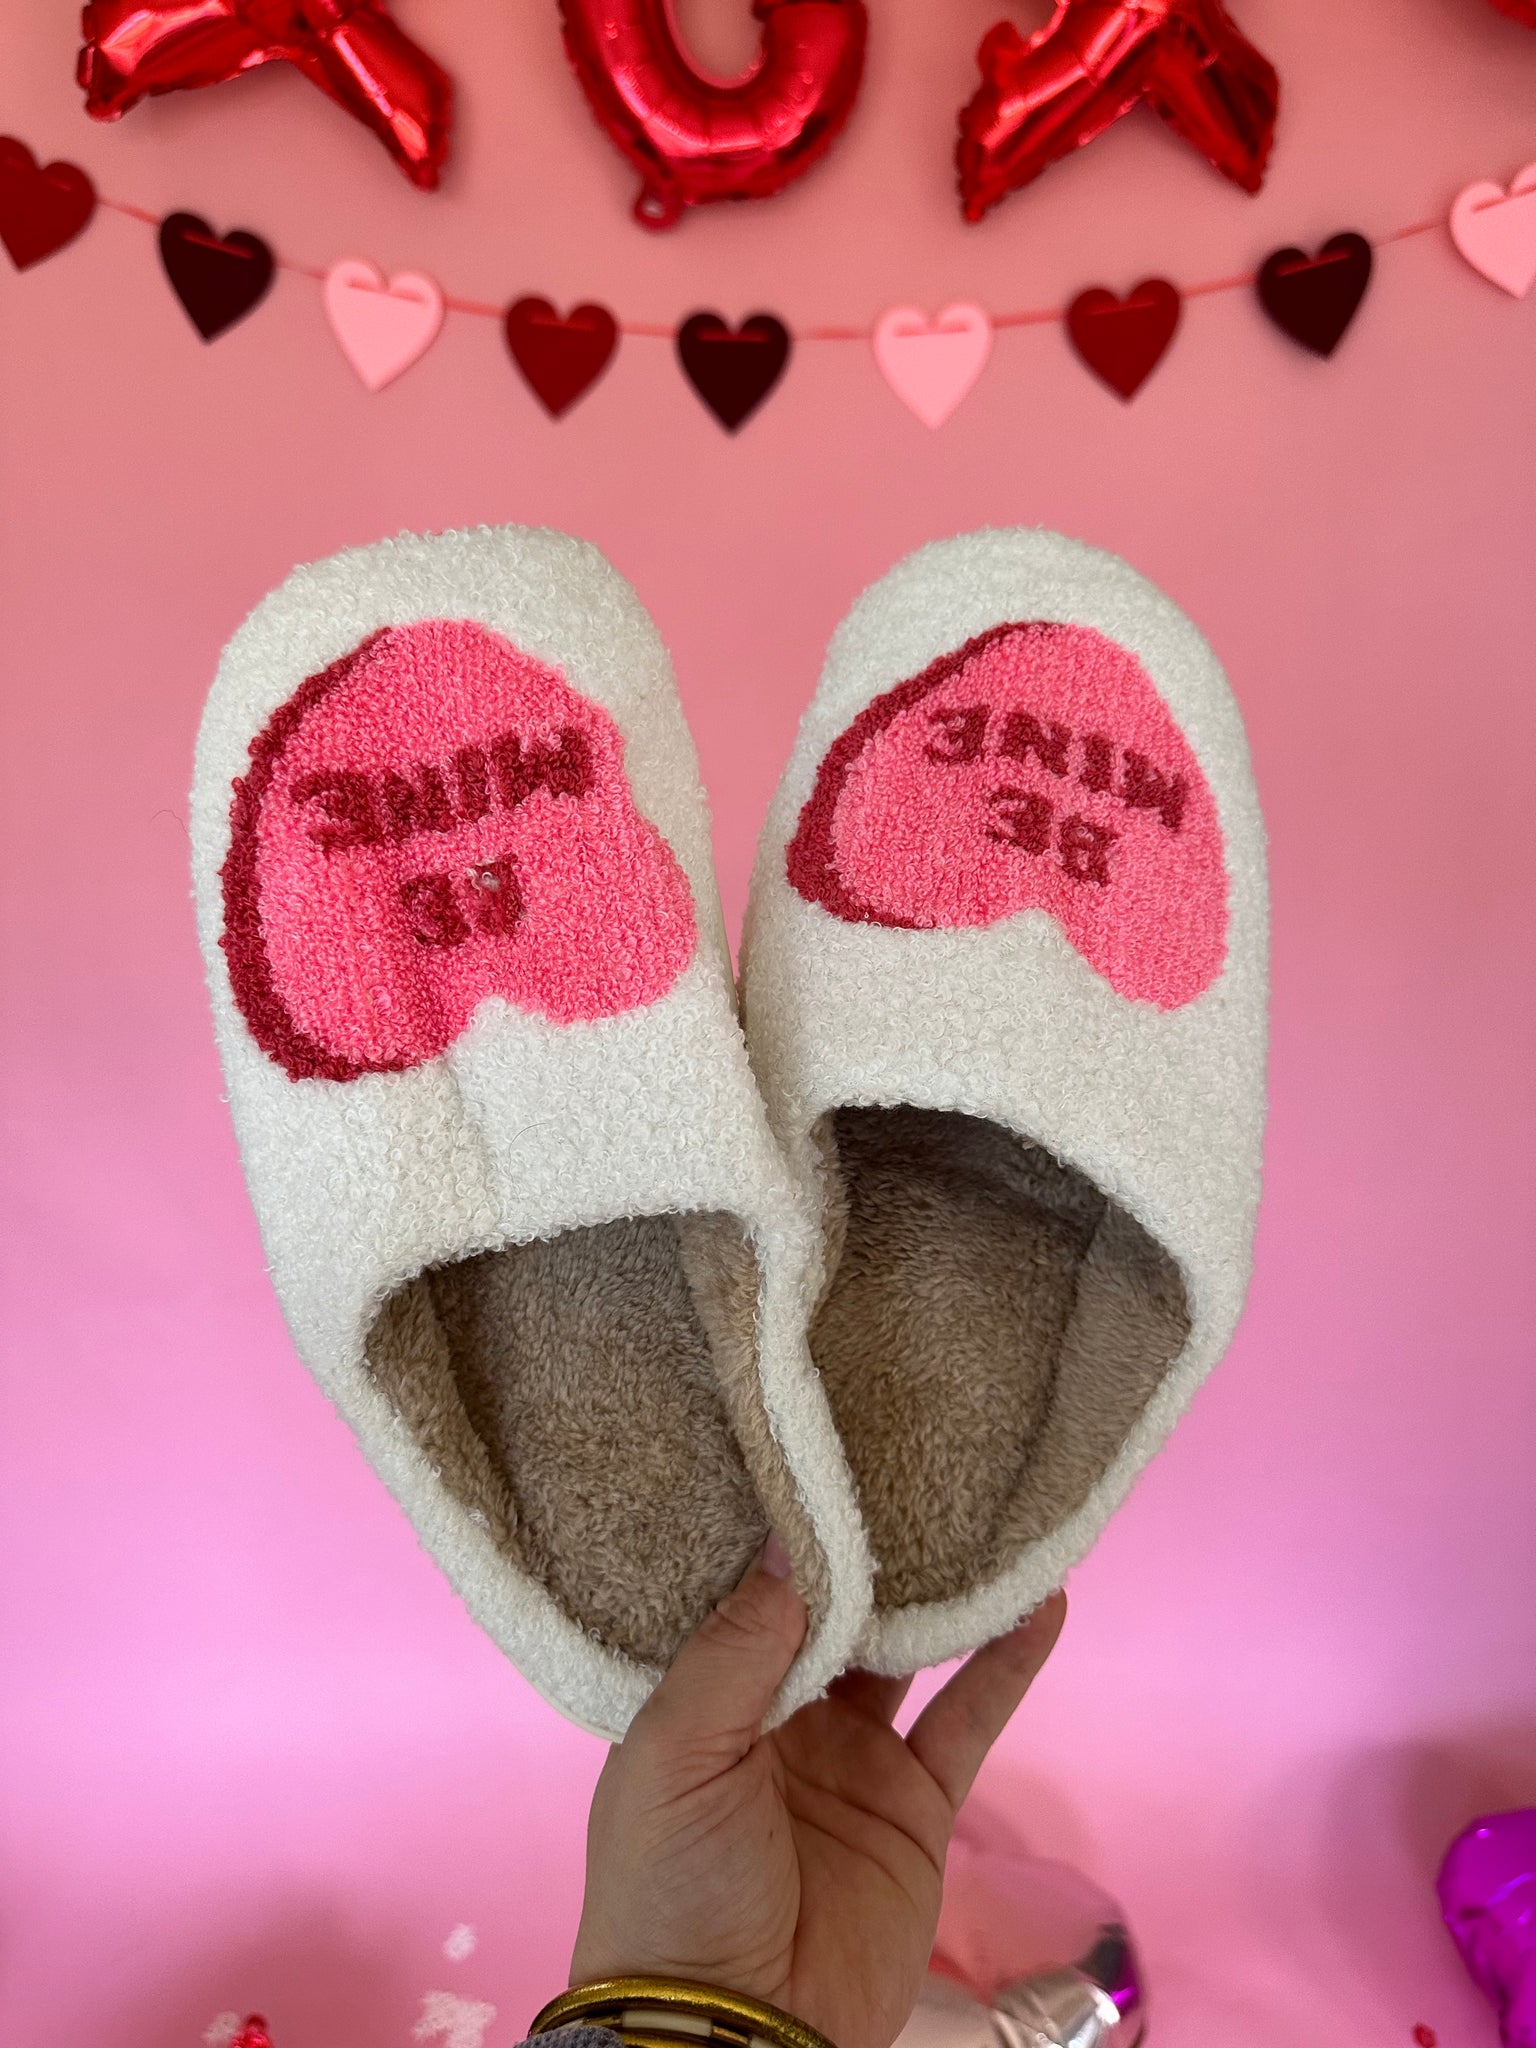 "Be Mine" Candy Slippers in-K. Ellis Boutique